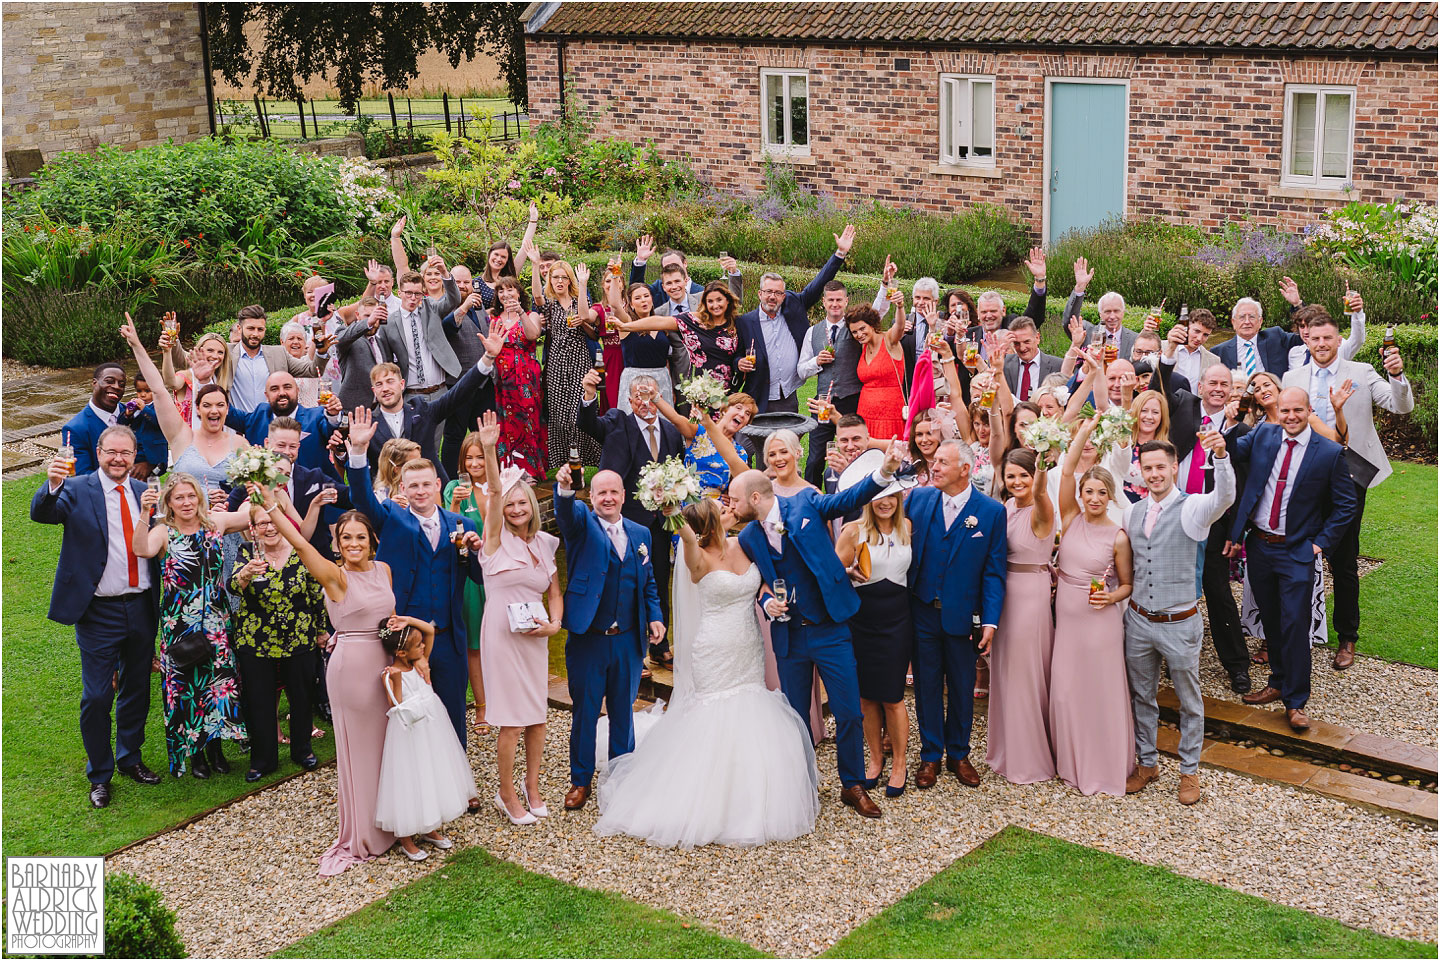 A photo of everyone at Priory Cottages in Yorkshire, Wedding photos at Priory Cottages, Wedding at The Priory Yorkshire